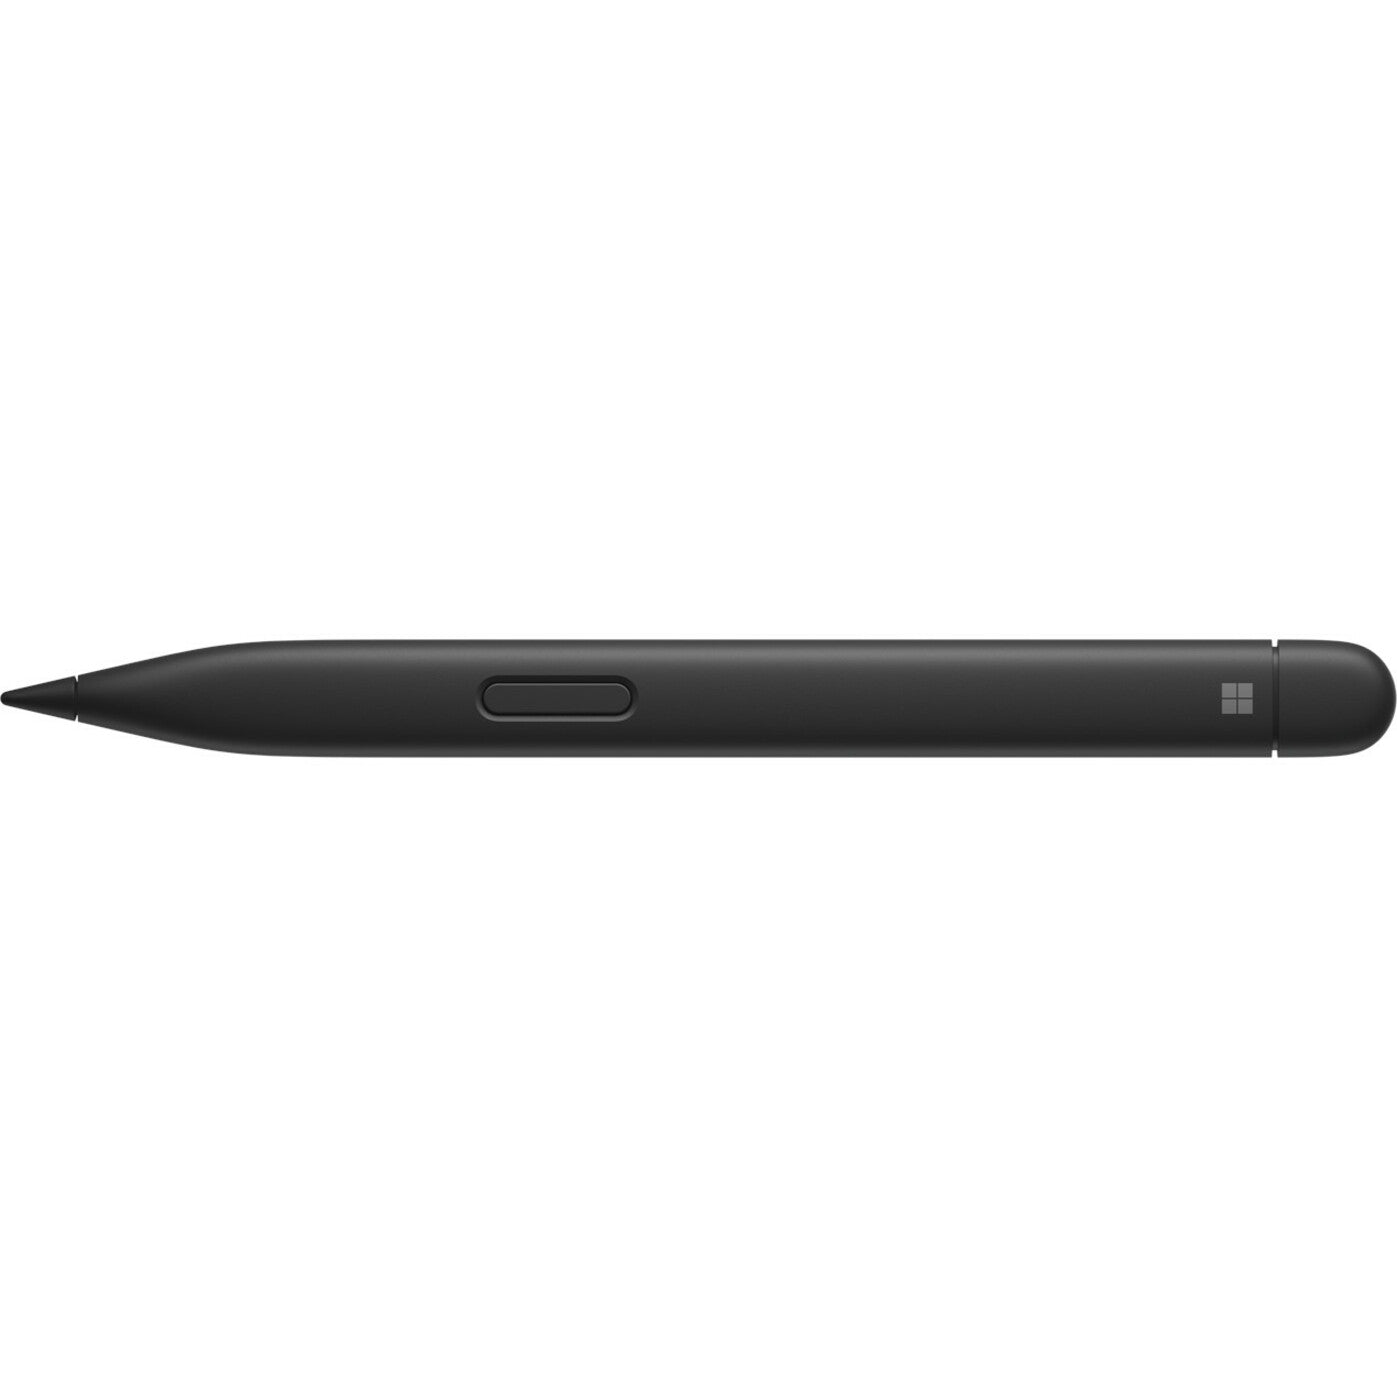 Microsoft IVD-00001 Surface Pen 2 Stylus, High-Precision Digital Pen for Microsoft Surface Devices